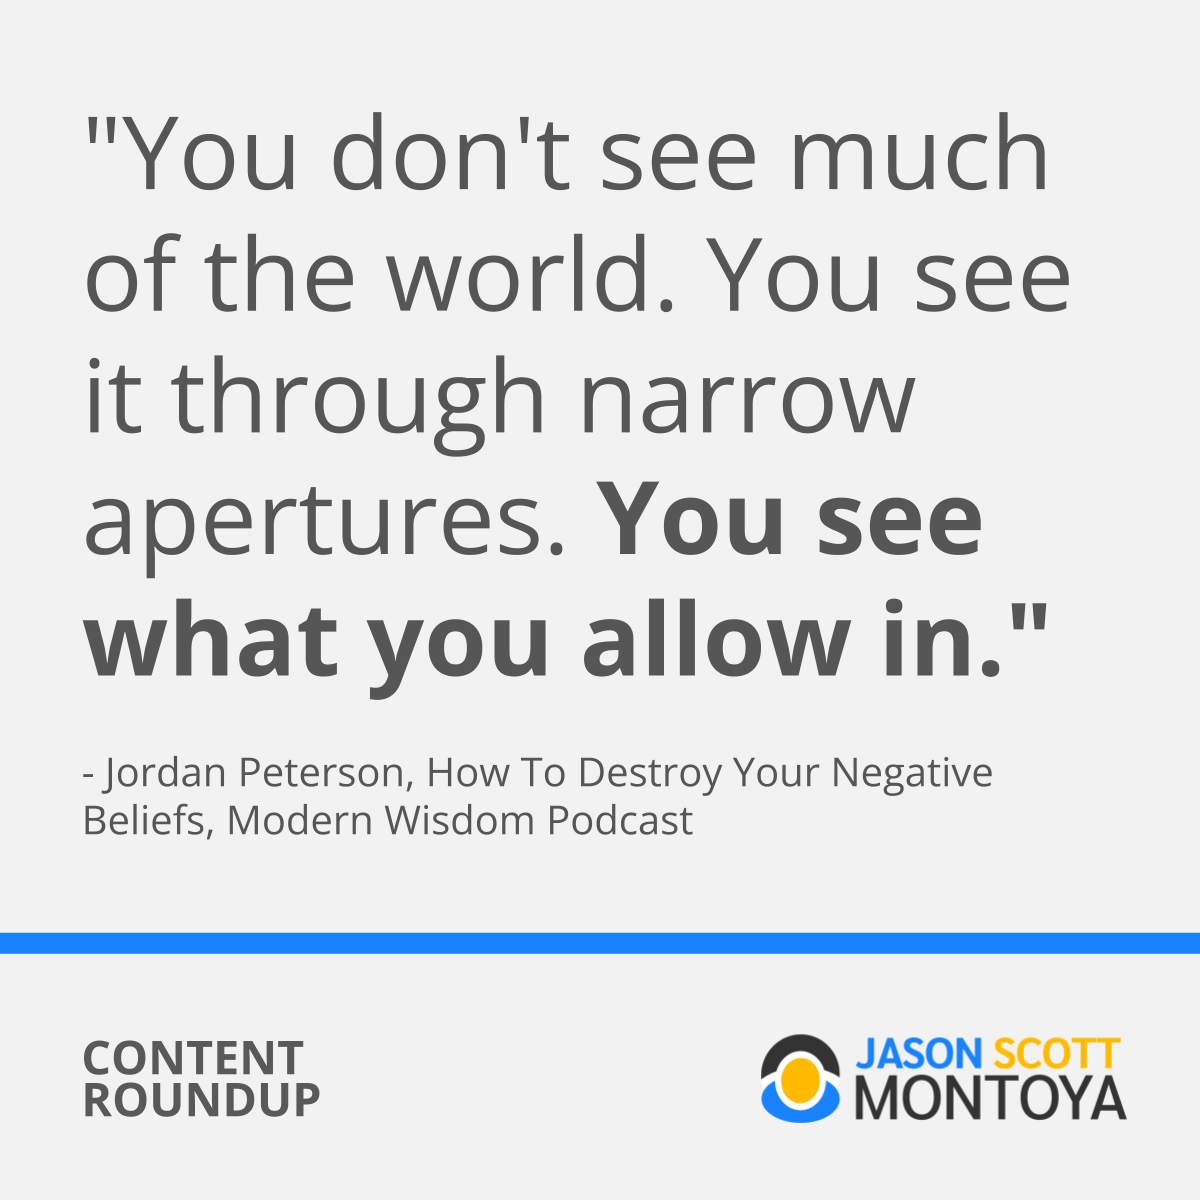 "You don't see much of the world. You see it through narrow apertures. You see what you allow in."  - Jordan Peterson, How To Destroy Your Negative Beliefs, Modern Wisdom Podcast